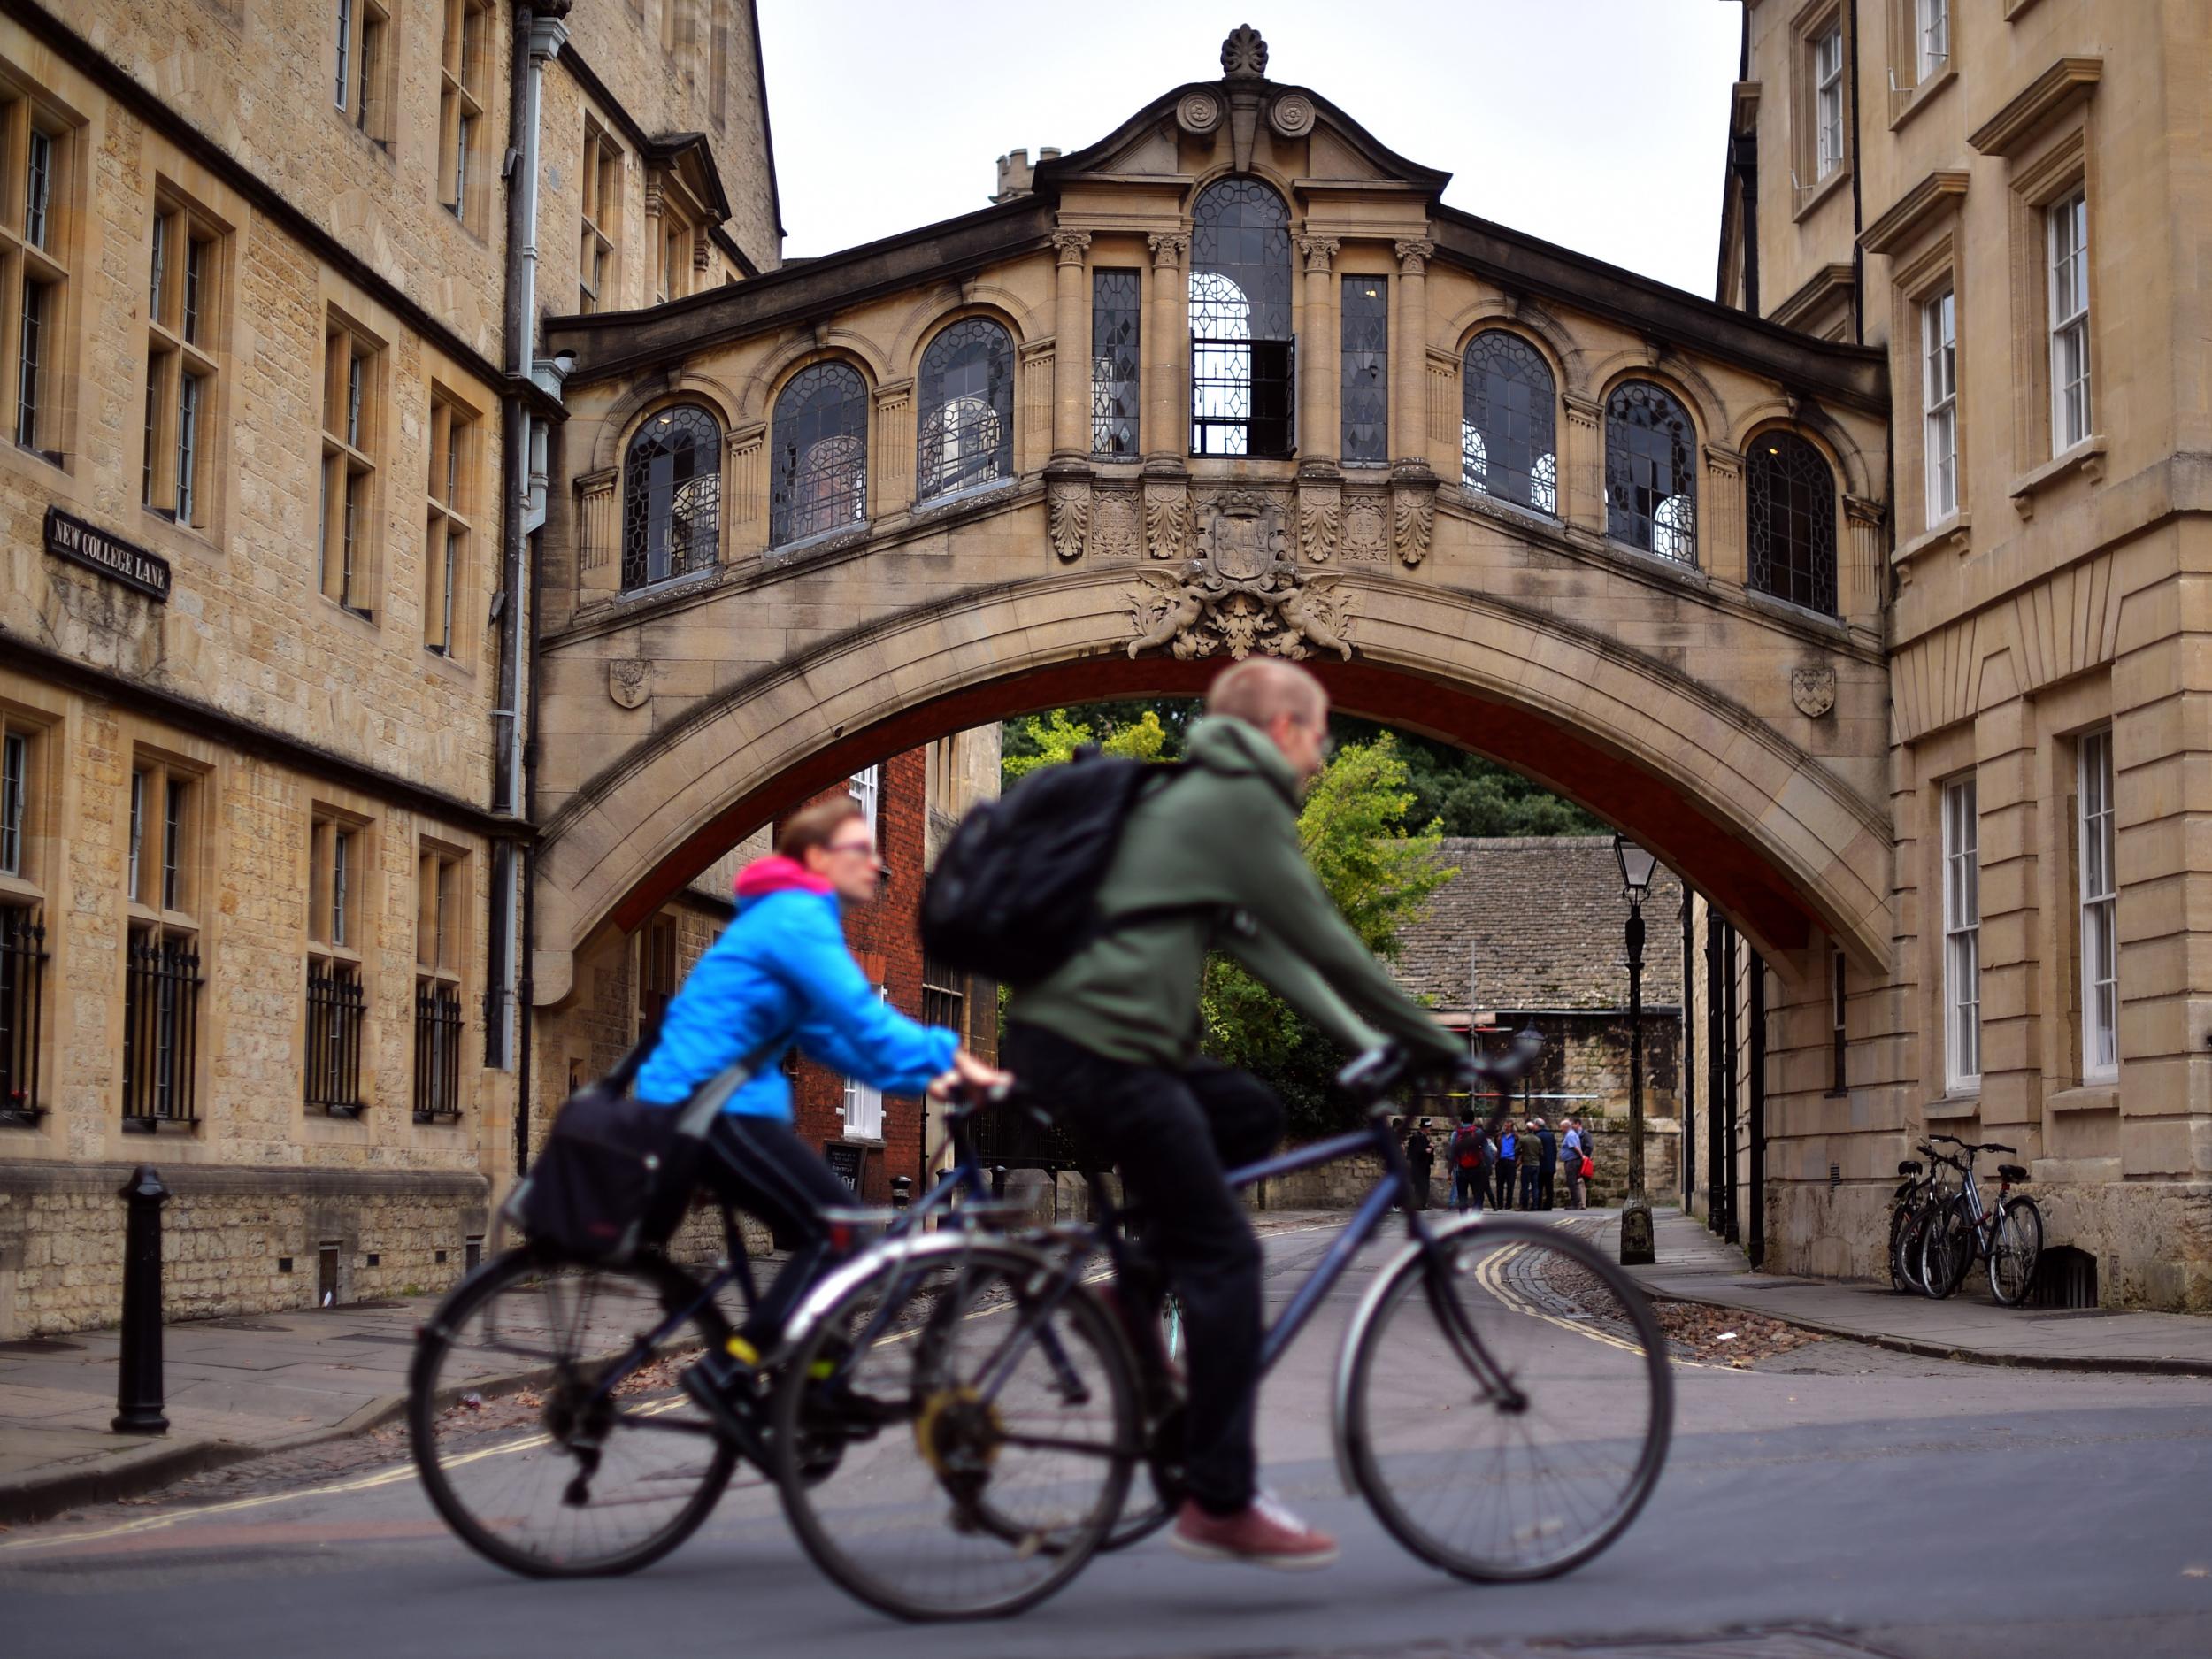 Movers and shakers: Oxbridge graduates earn an average of £1.8m over their lifetime, compared with £1.6m for those who attend other respected universities